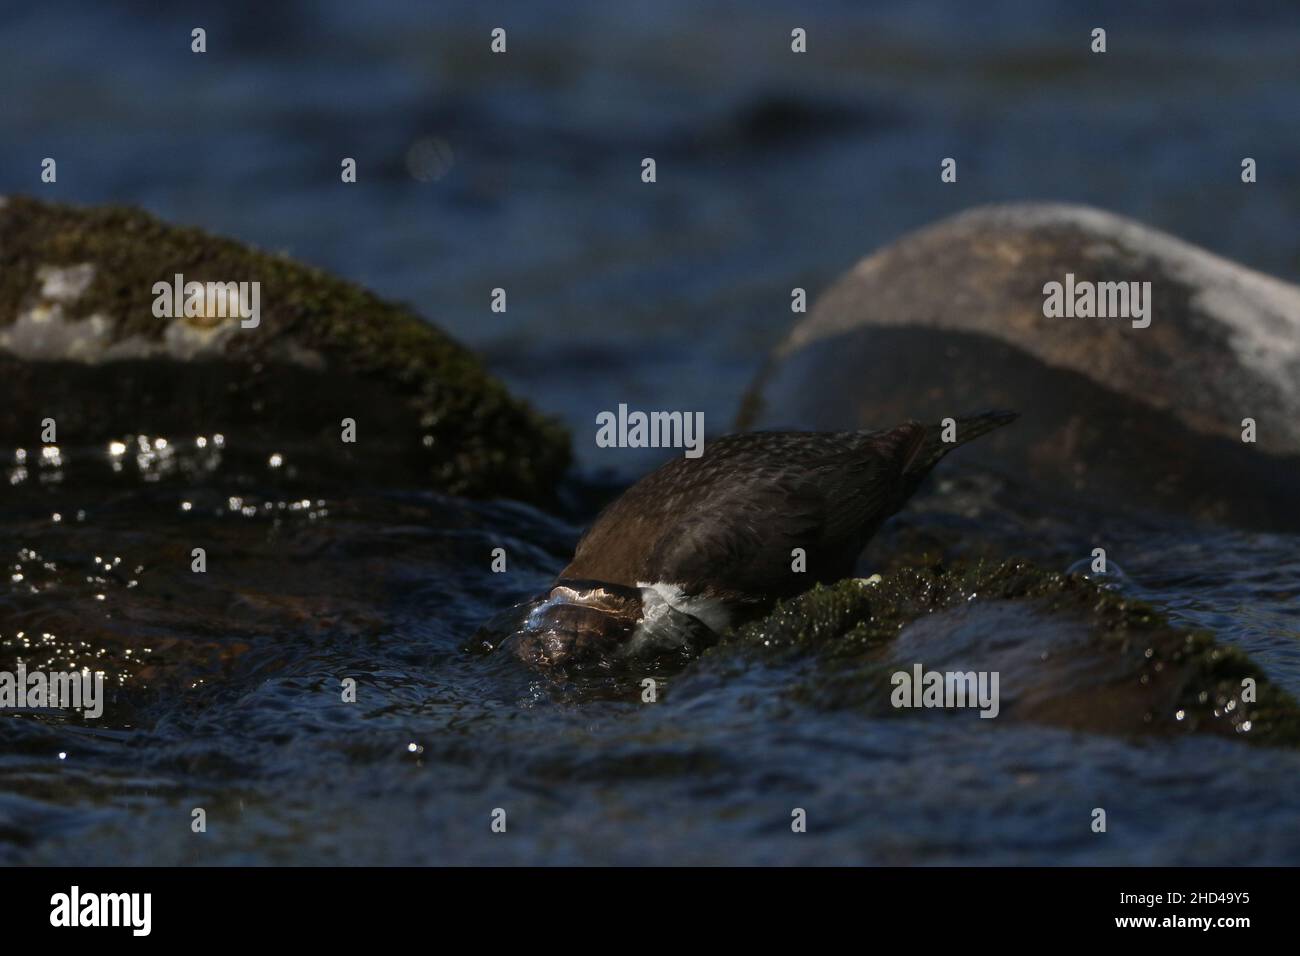 A dipper searching for prey underwater before jumping in to feed on fish or insects . Completely immerses itself to search for prey under stones. Stock Photo